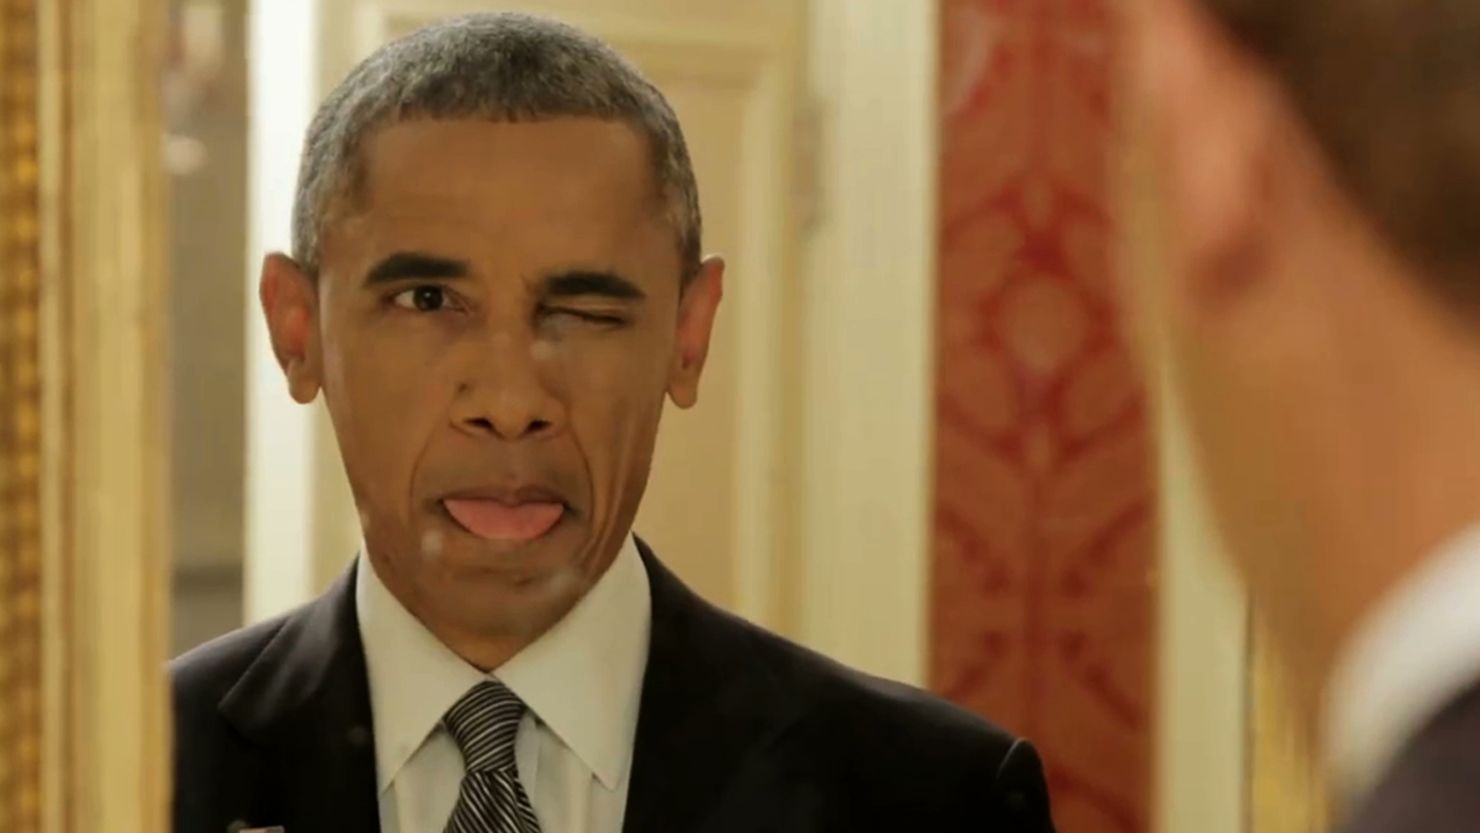 President Obama appeared in a Buzzfeed video. 